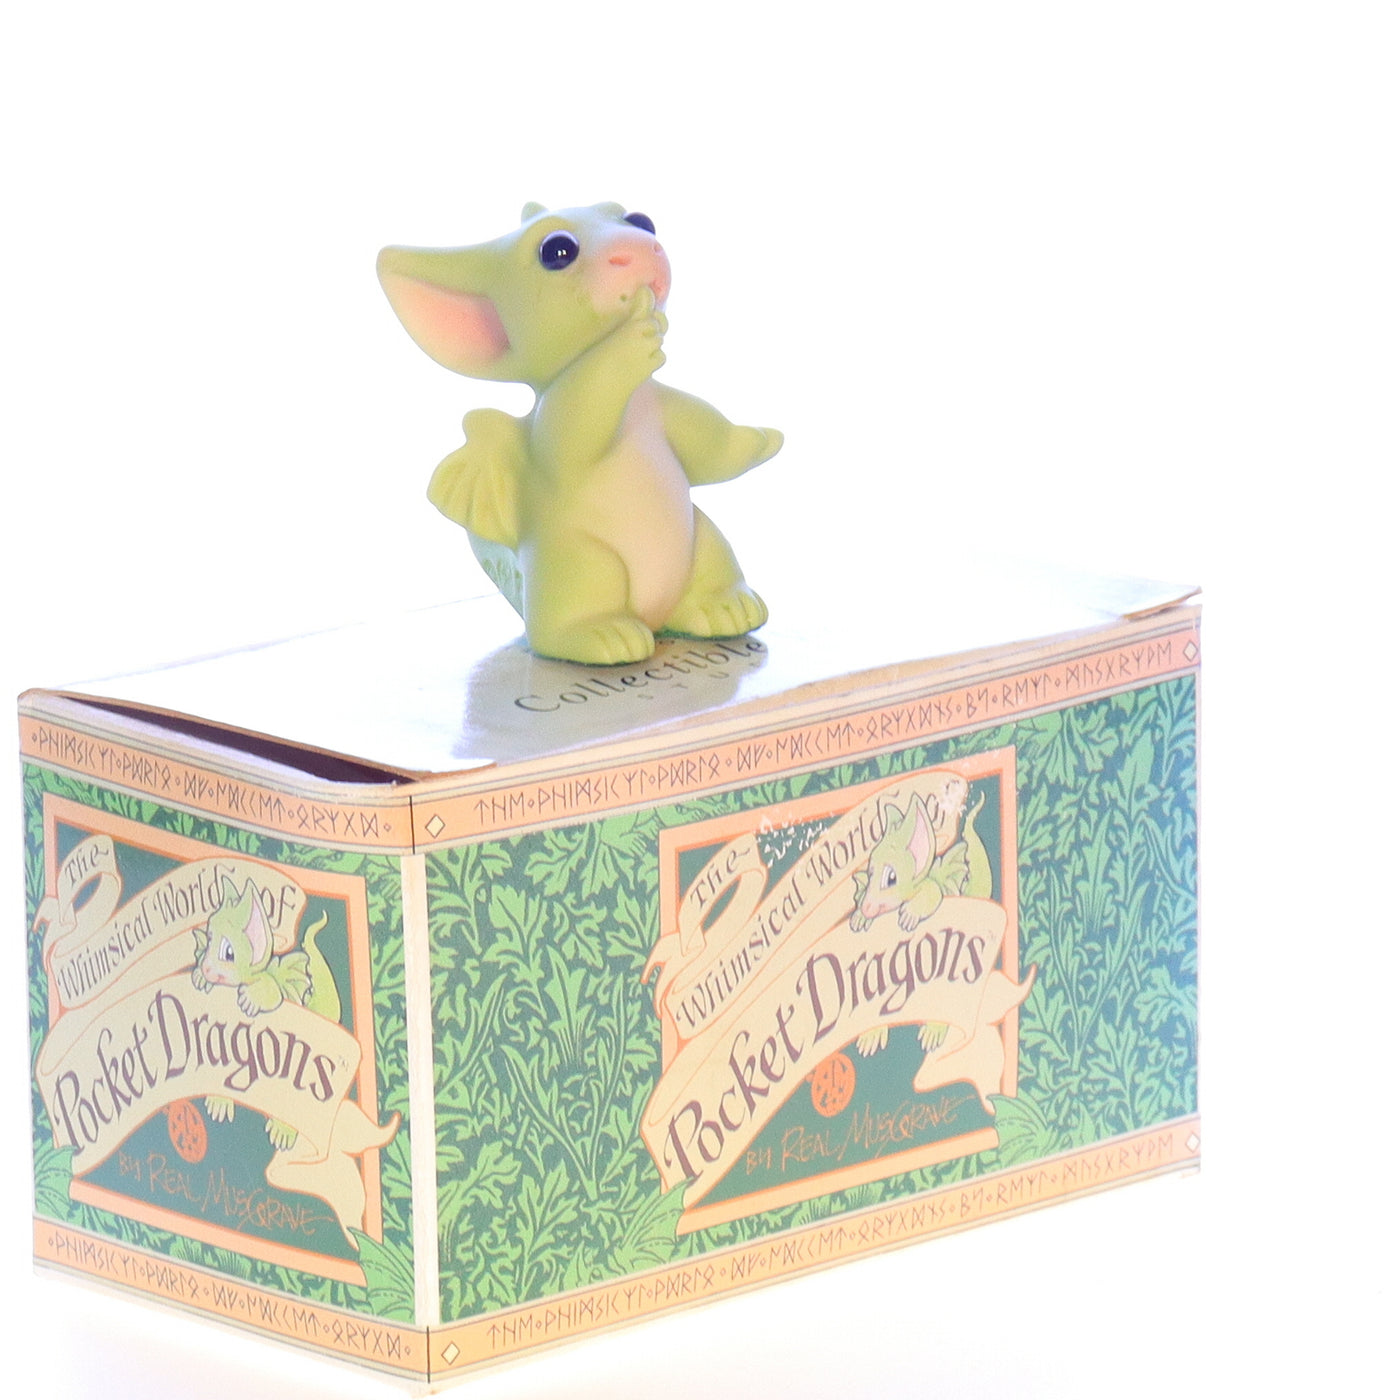 Whimsical_World_of_Pocket_Dragons_013855_SHHHH_Fantasy_Figurine_1998_Box Front Right View